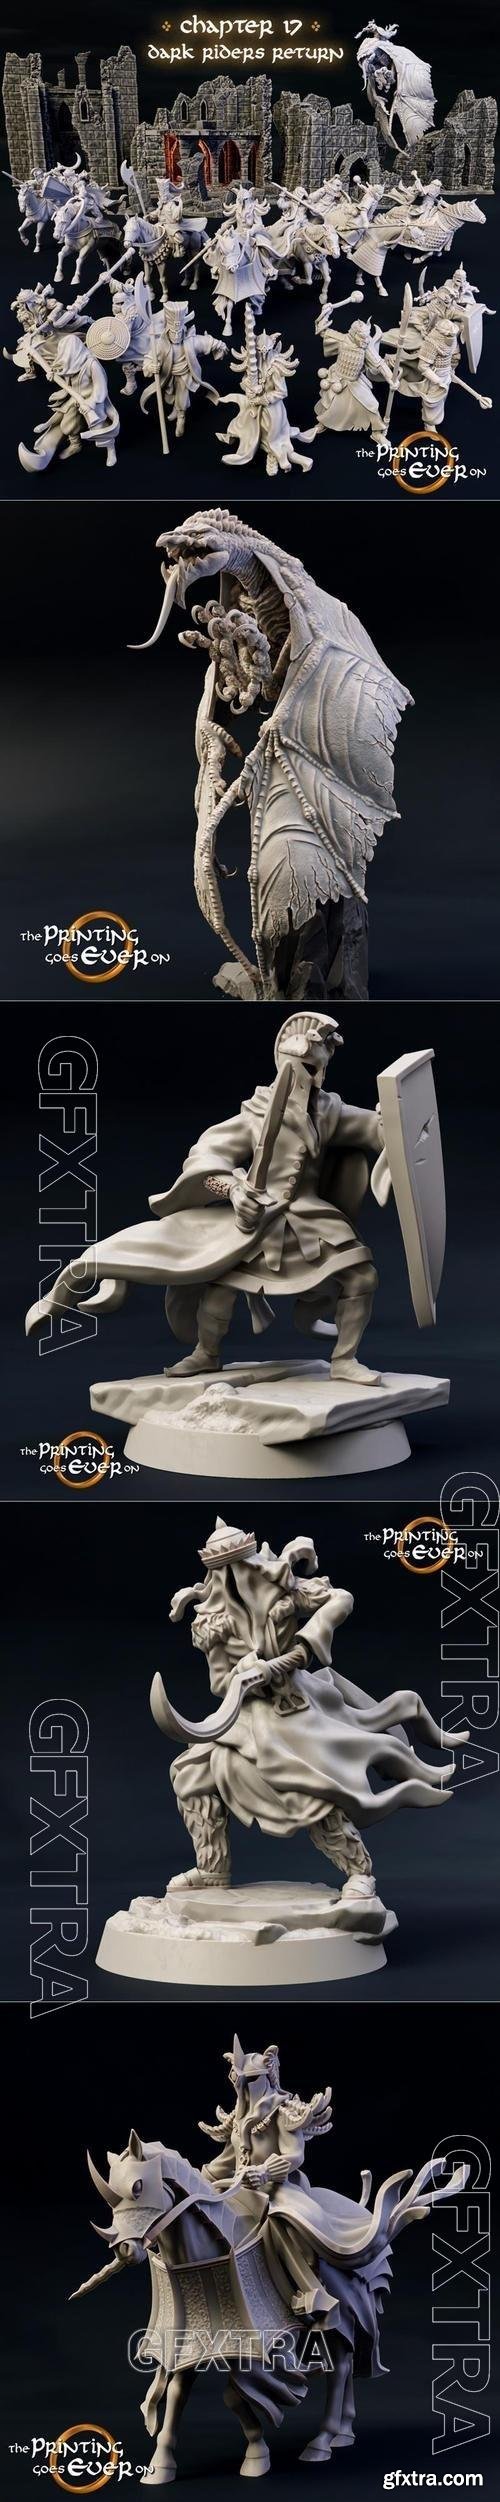 The Printing Goes Ever On - Chapter 17 3D Printable » GFxtra